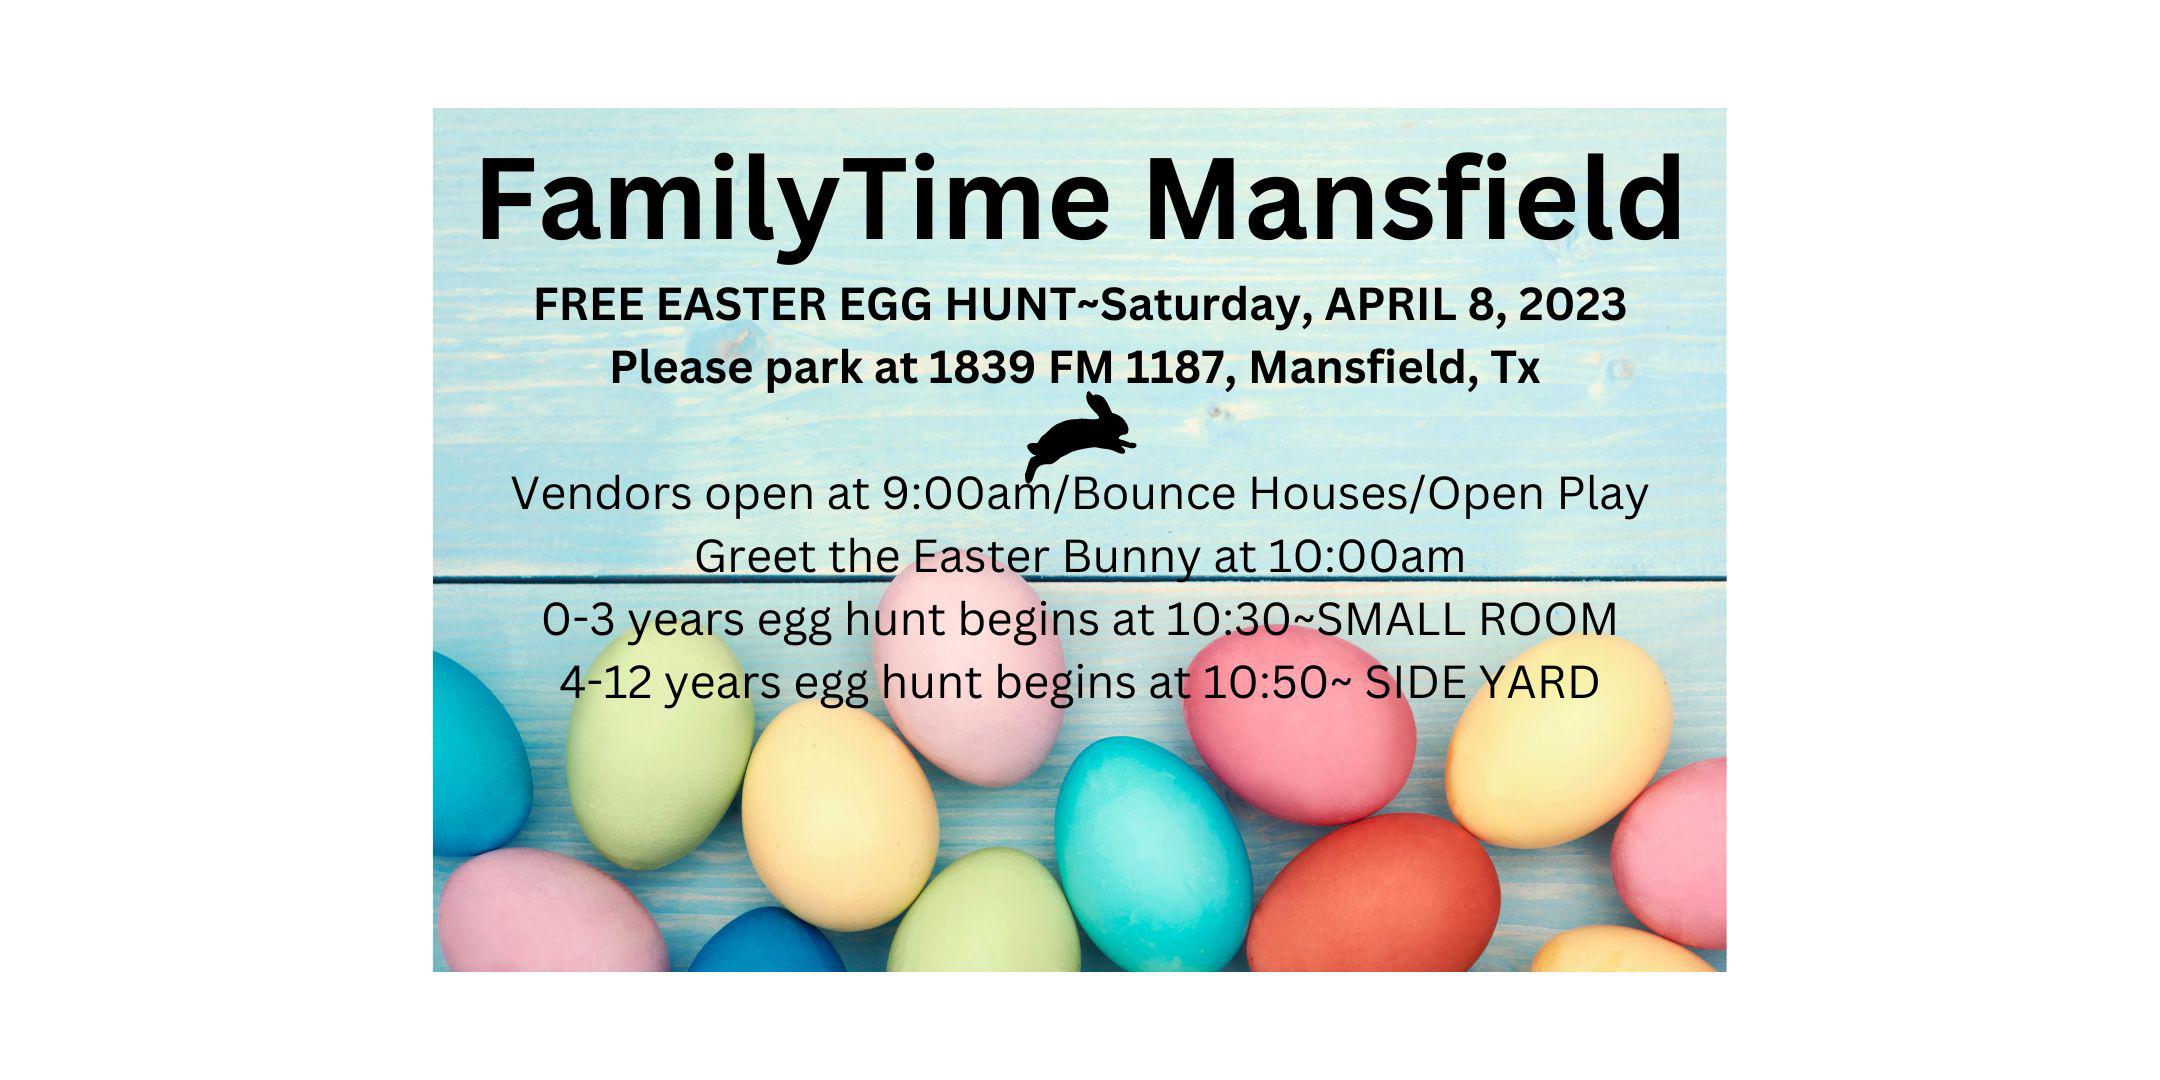 Annual FamilyTime Mansfield FREE Easter Egg Hunt Tickets, Sat, Apr 8